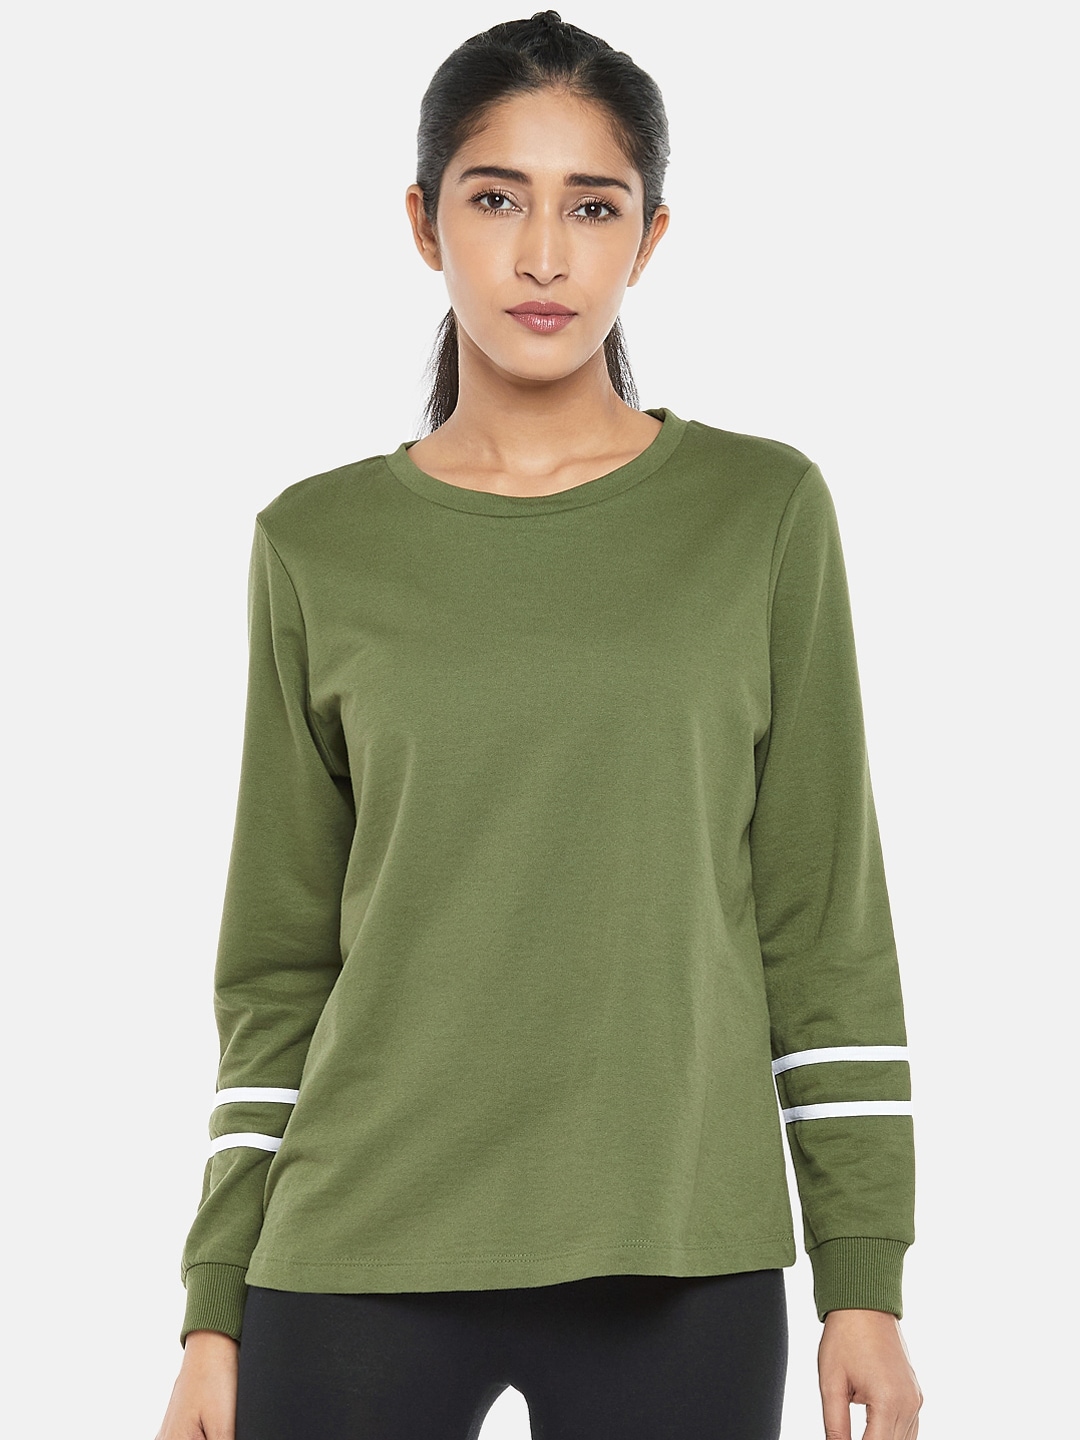 Ajile by Pantaloons Women Olive Green Solid Sweatshirt Price in India